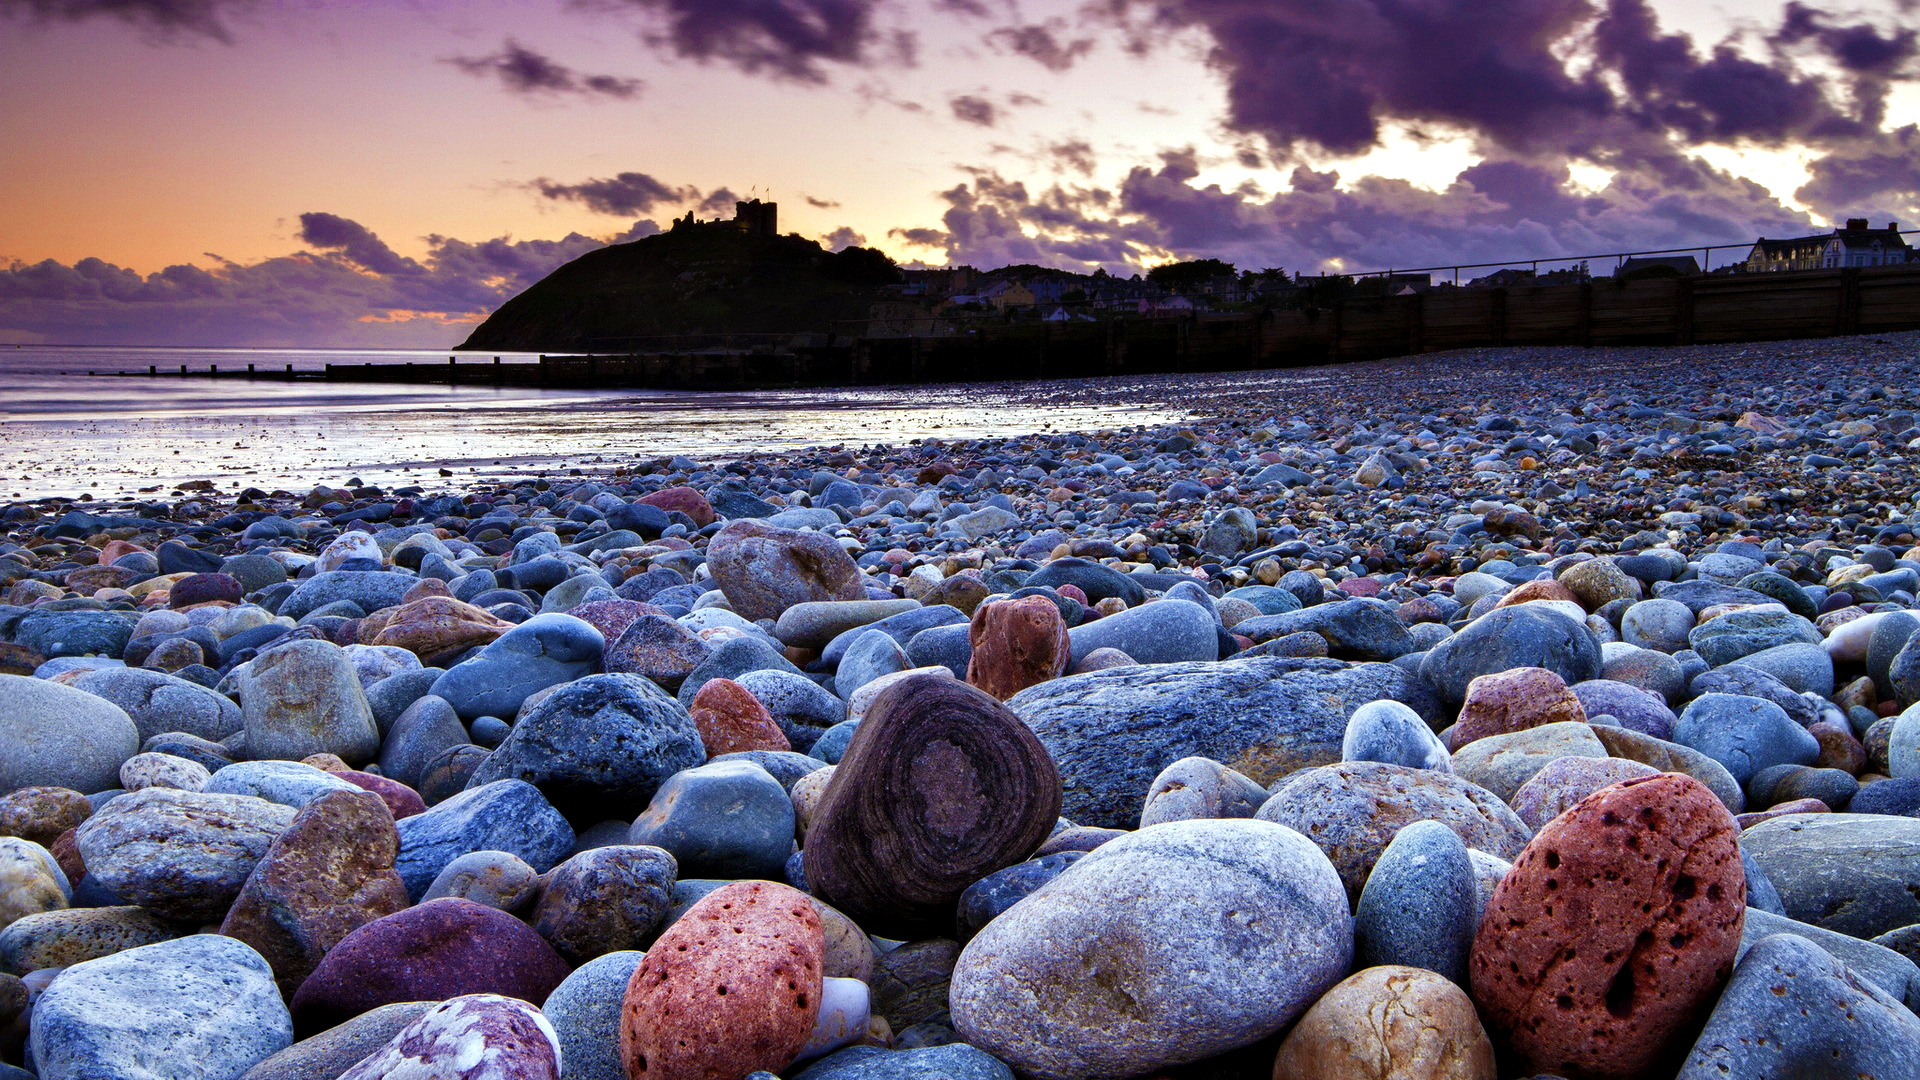 Colorful stone, Beach wallpaper, Natural textures, Tranquil scenery, 1920x1080 Full HD Desktop